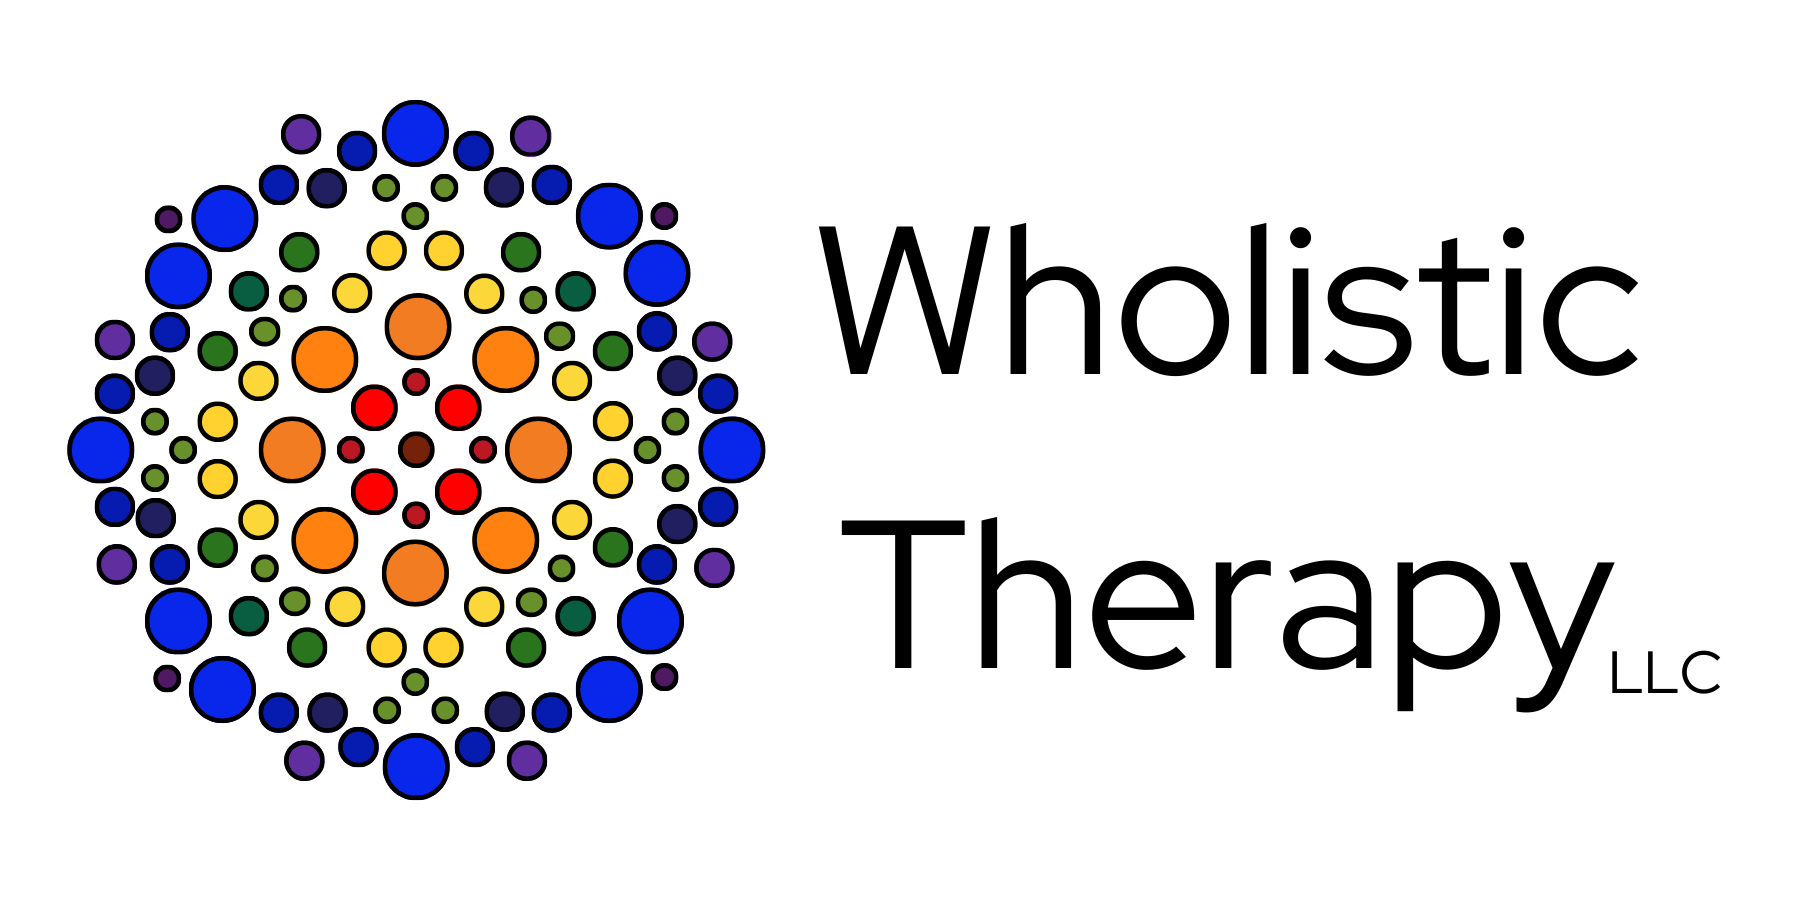 Wholistic Therapy, LLC